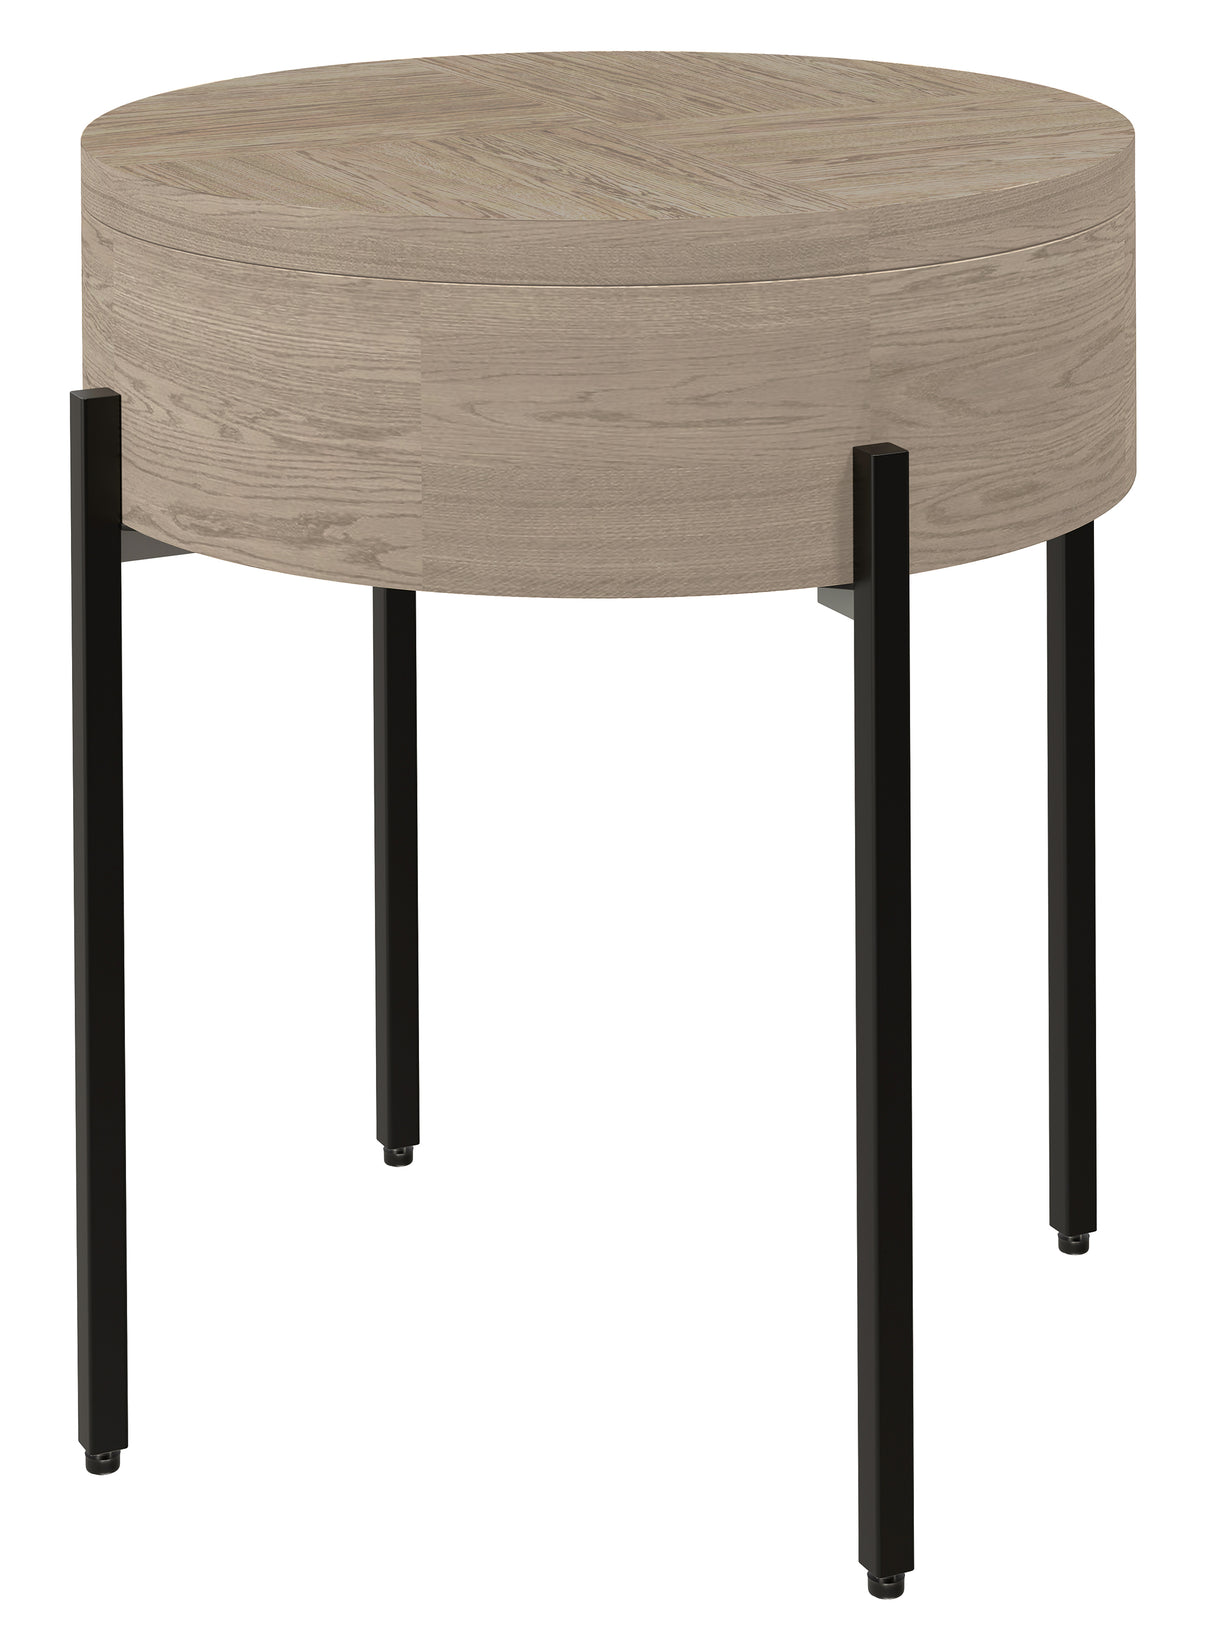 Hekman 25904 Mayfield 24.5in. x 24.5in. x 26.25in. End Table